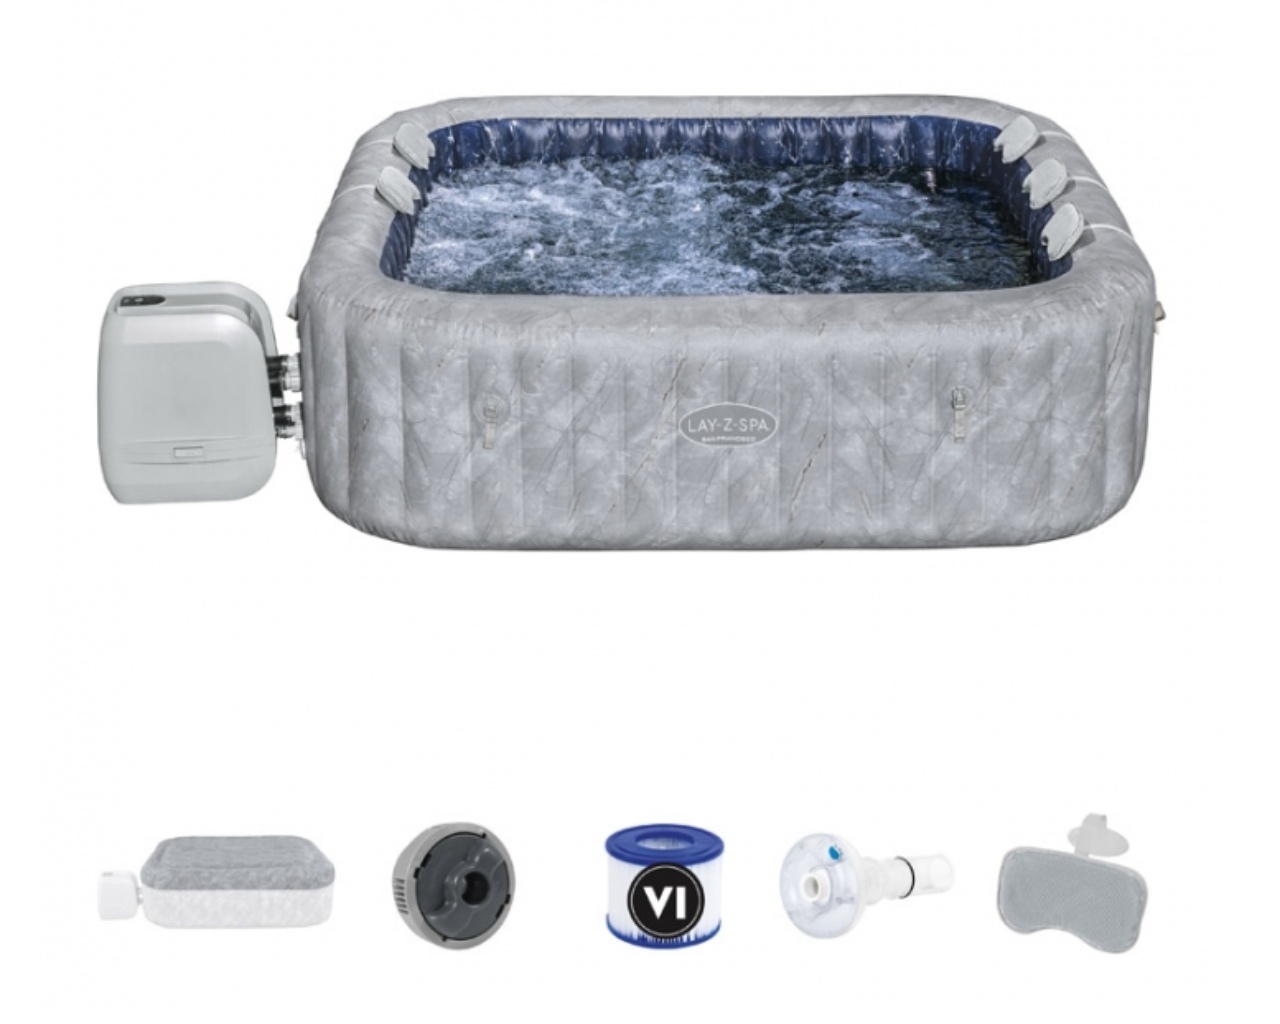 Spa gonflable carre SAN FRANCISCO Hydrojet Bestway Lay-Z-Spa LED 5 a 7 personnes avec banquettes